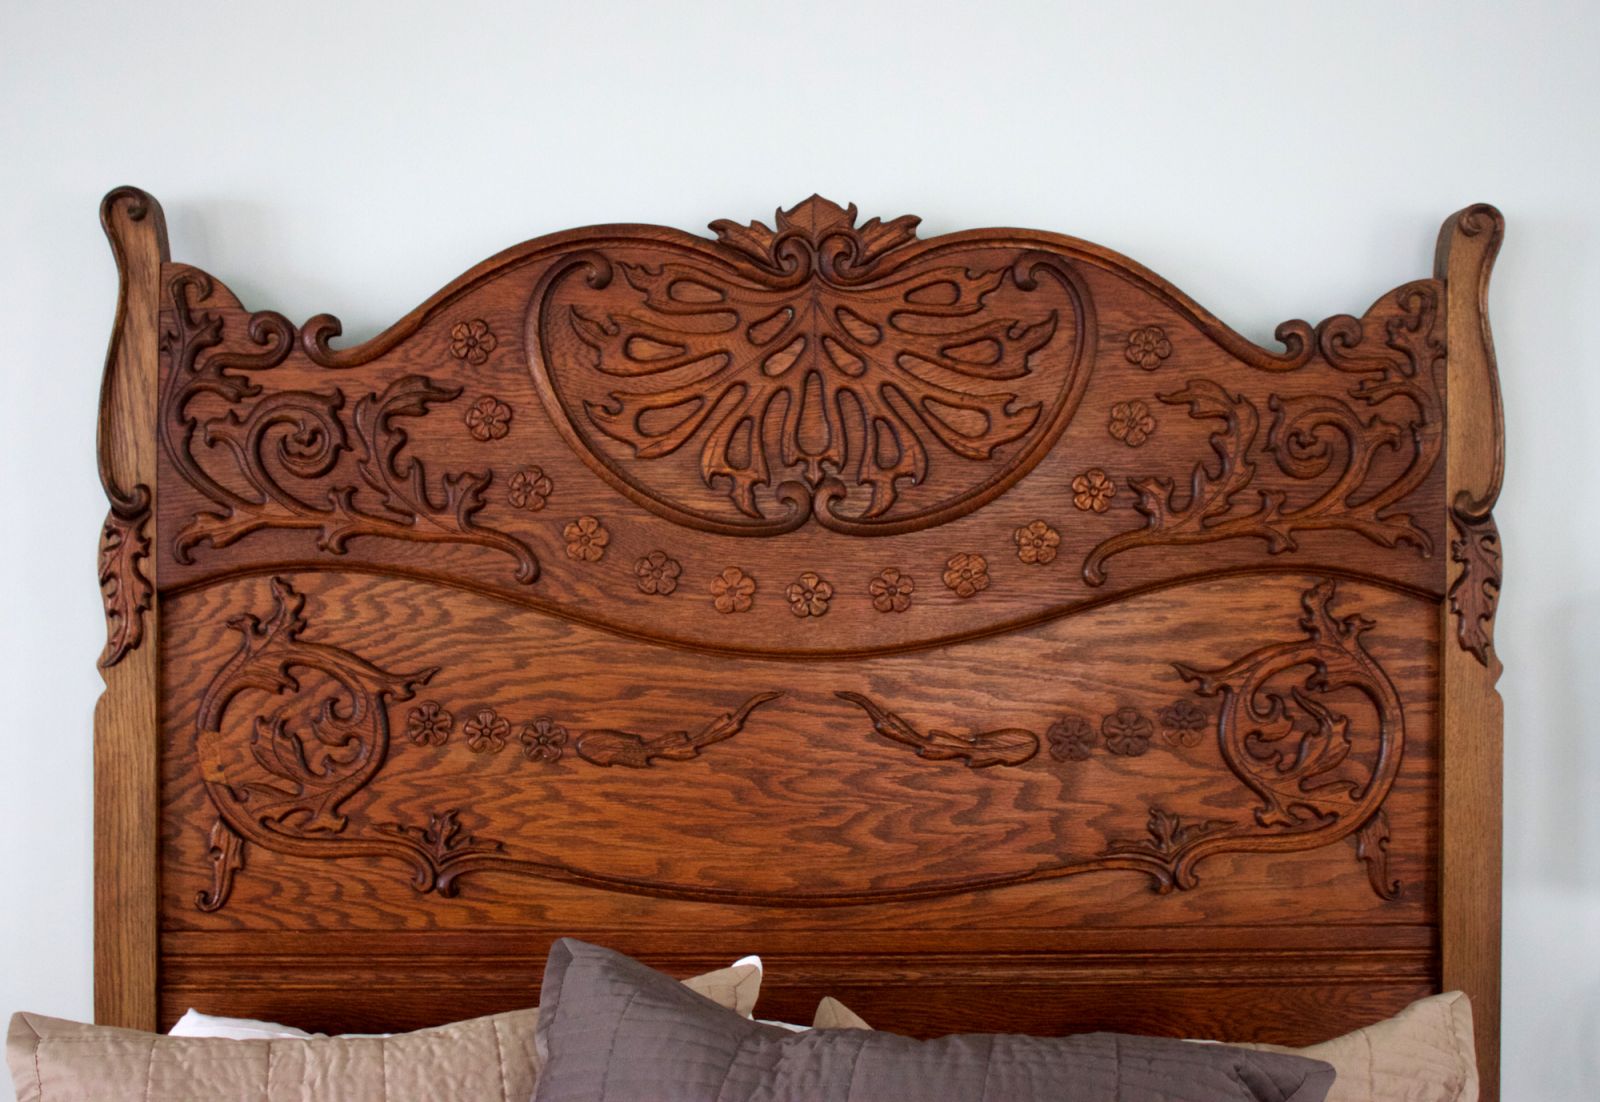 Image of an intricate wooden headboard used for the site